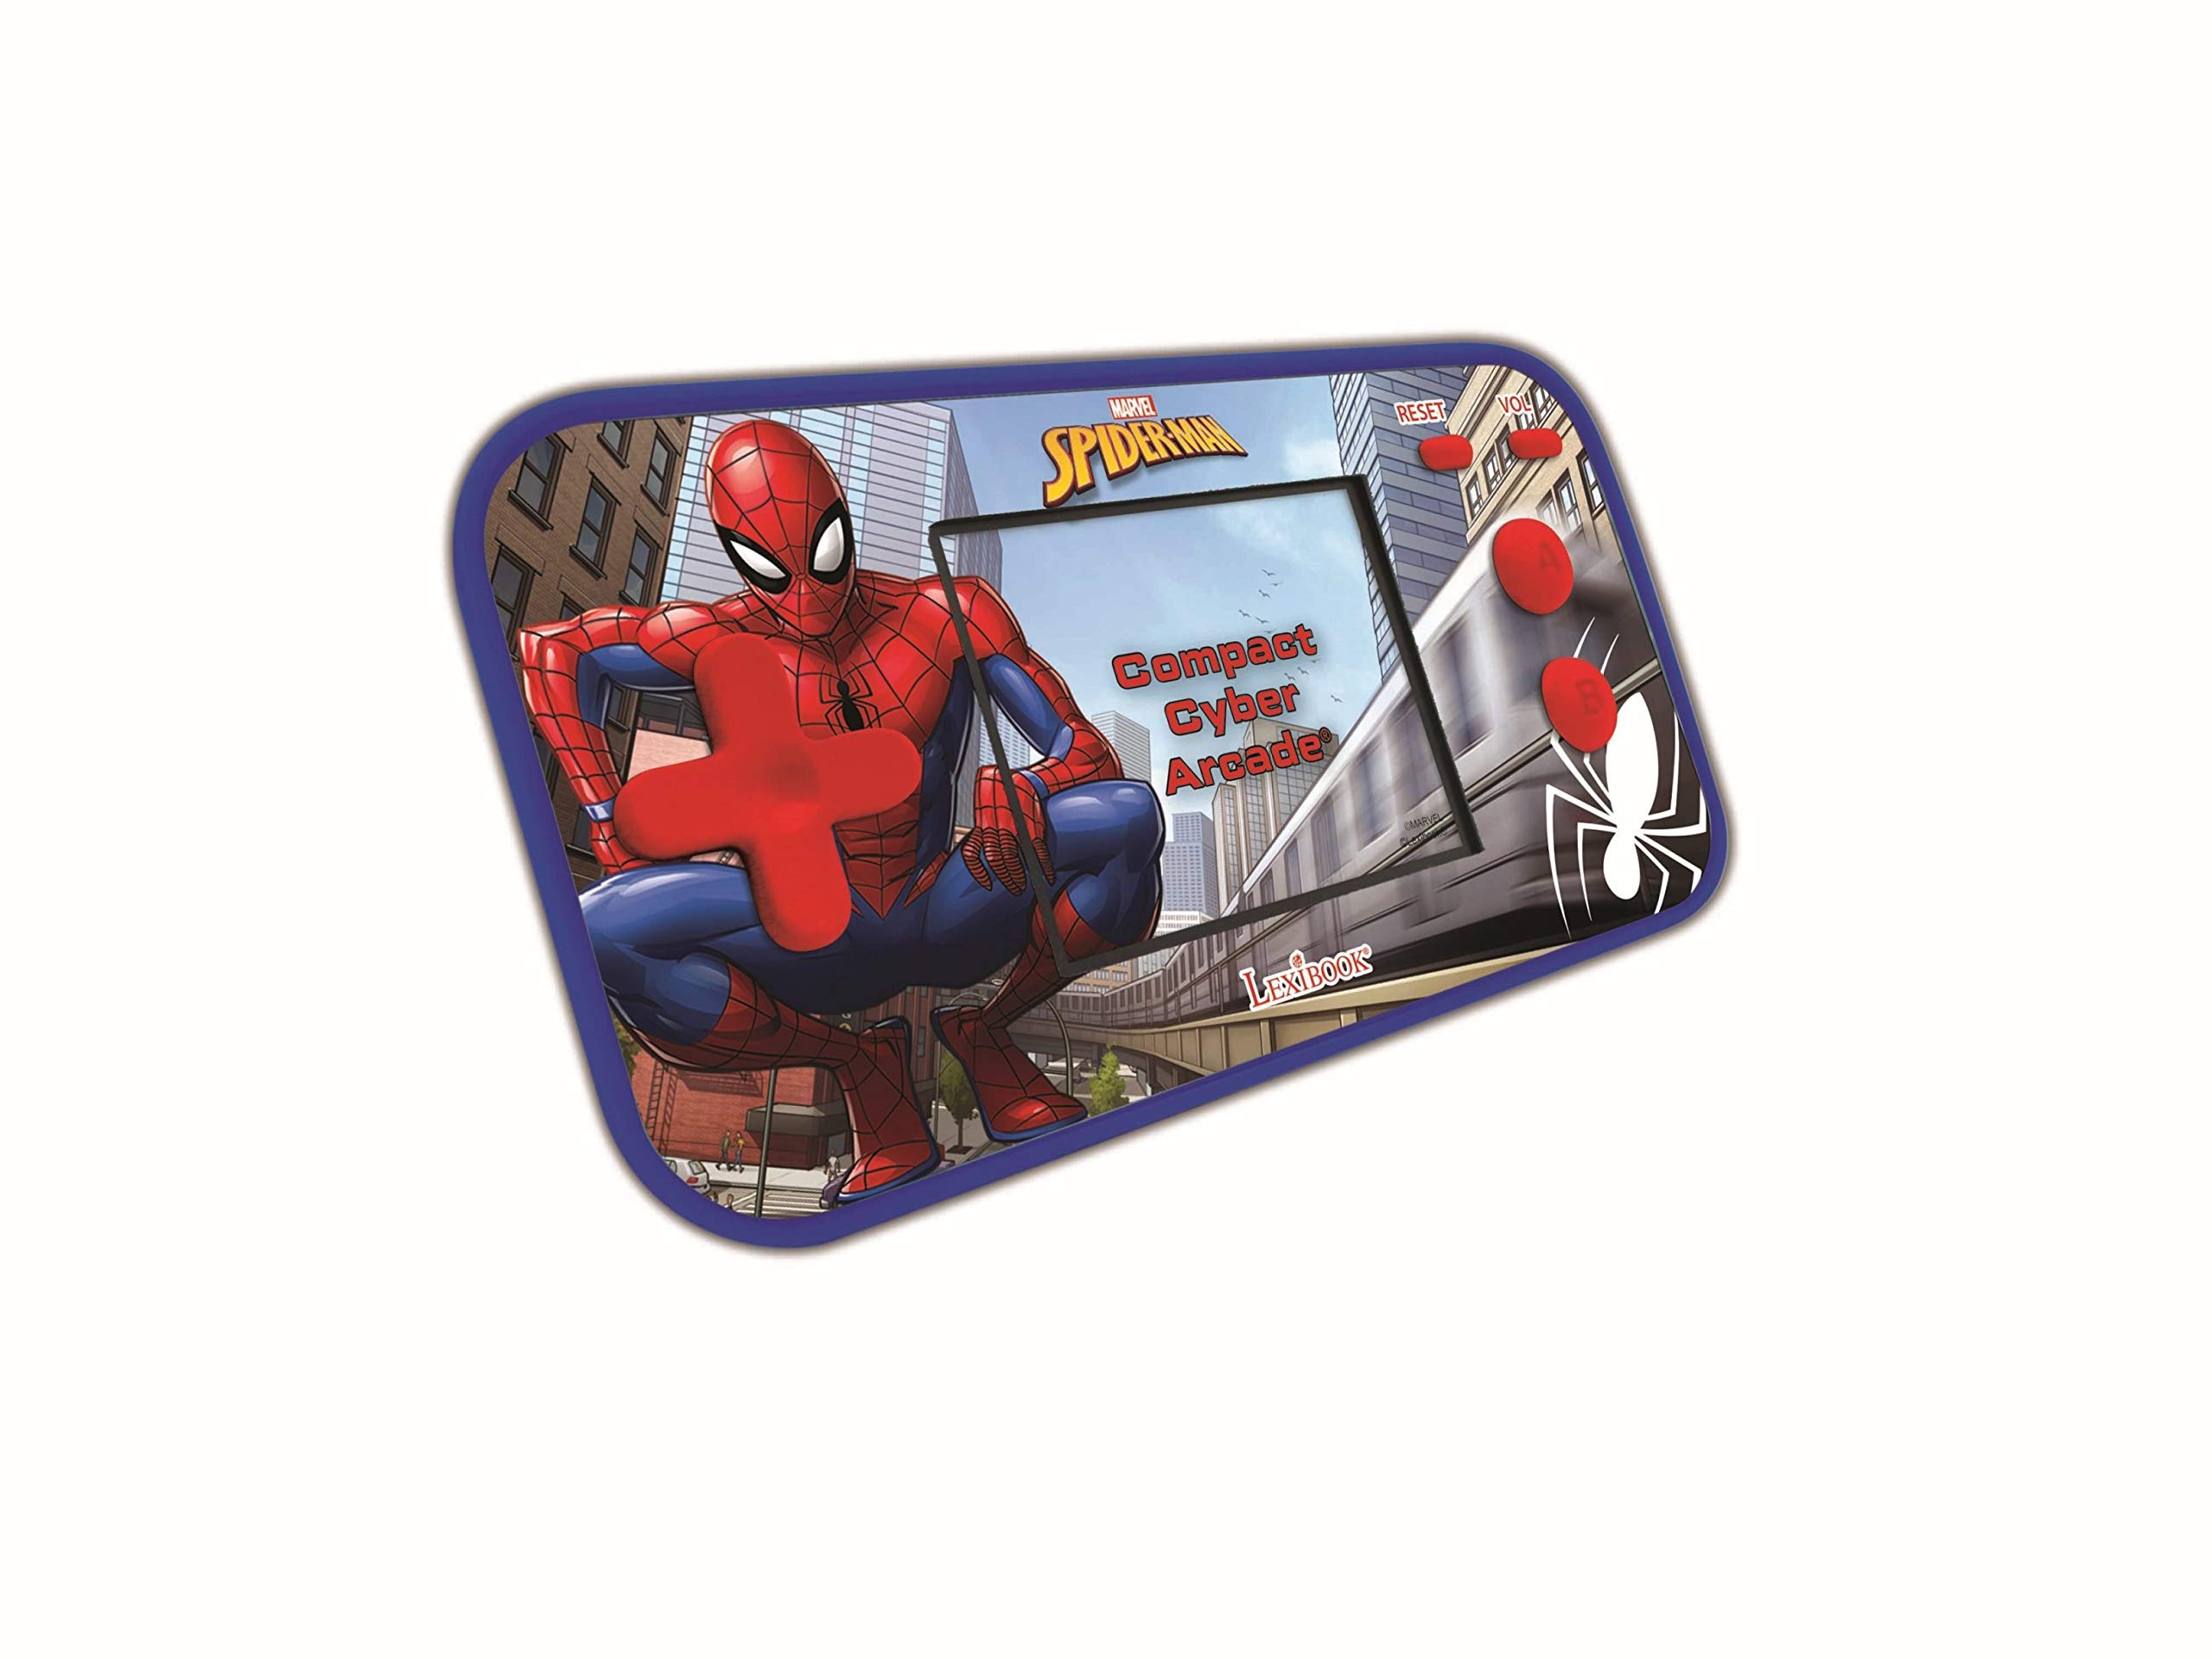 LEXiBOOK Marvel Spider-Man Peter Parker, Compact Cyber Arcade®, Portable Gaming Console, 150 Games, LCD Colour Screen, Battery Operated, Blue, JL2367SP